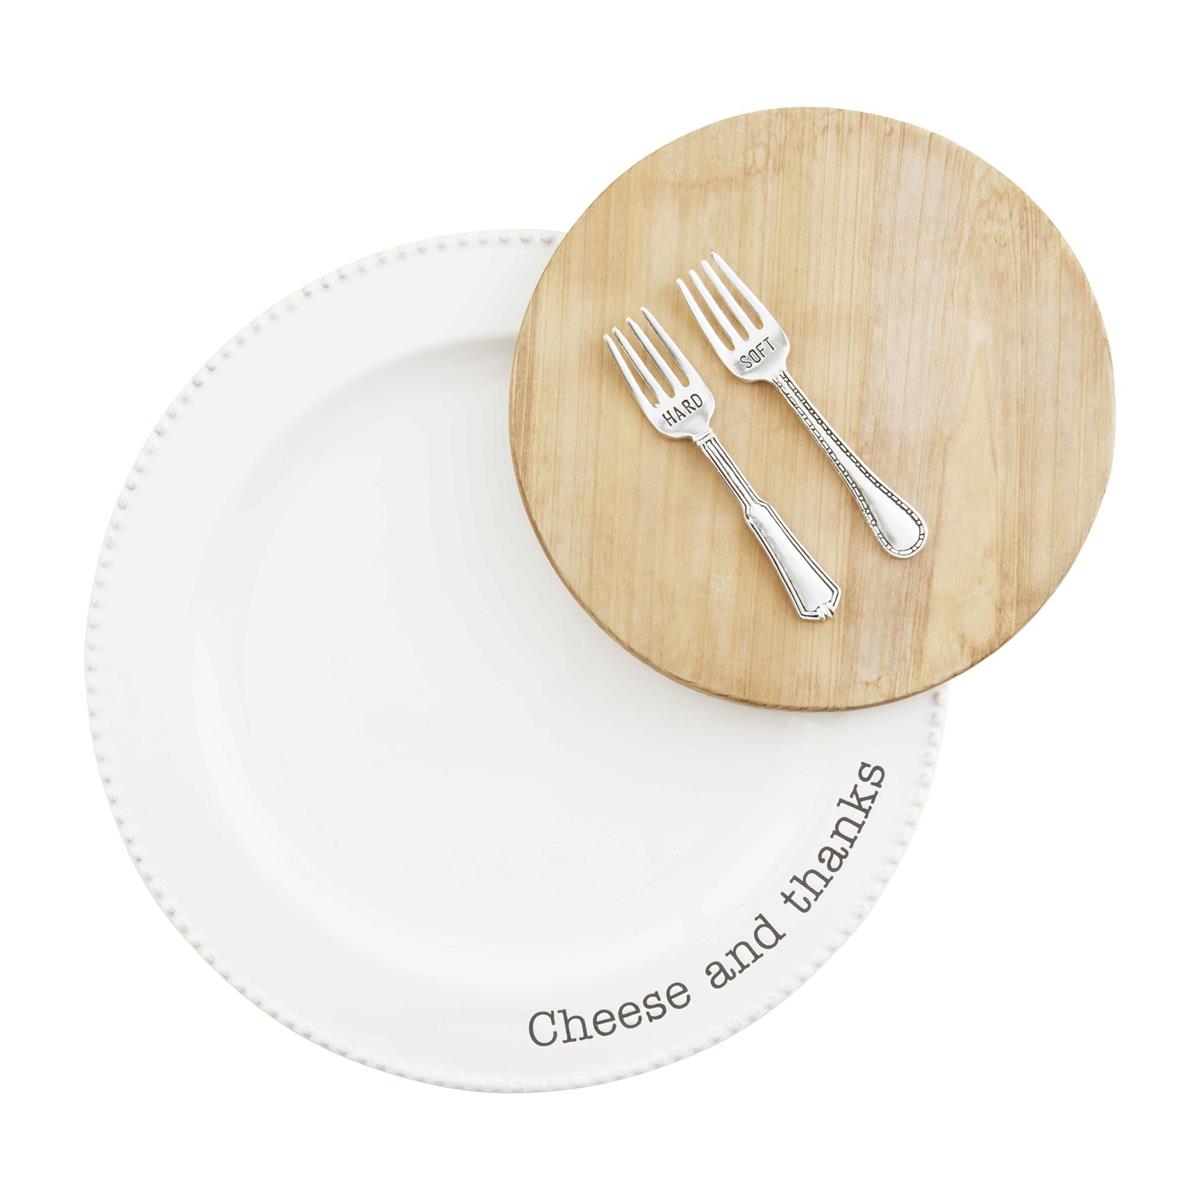 Cheese and Thanks Plate & Board Set